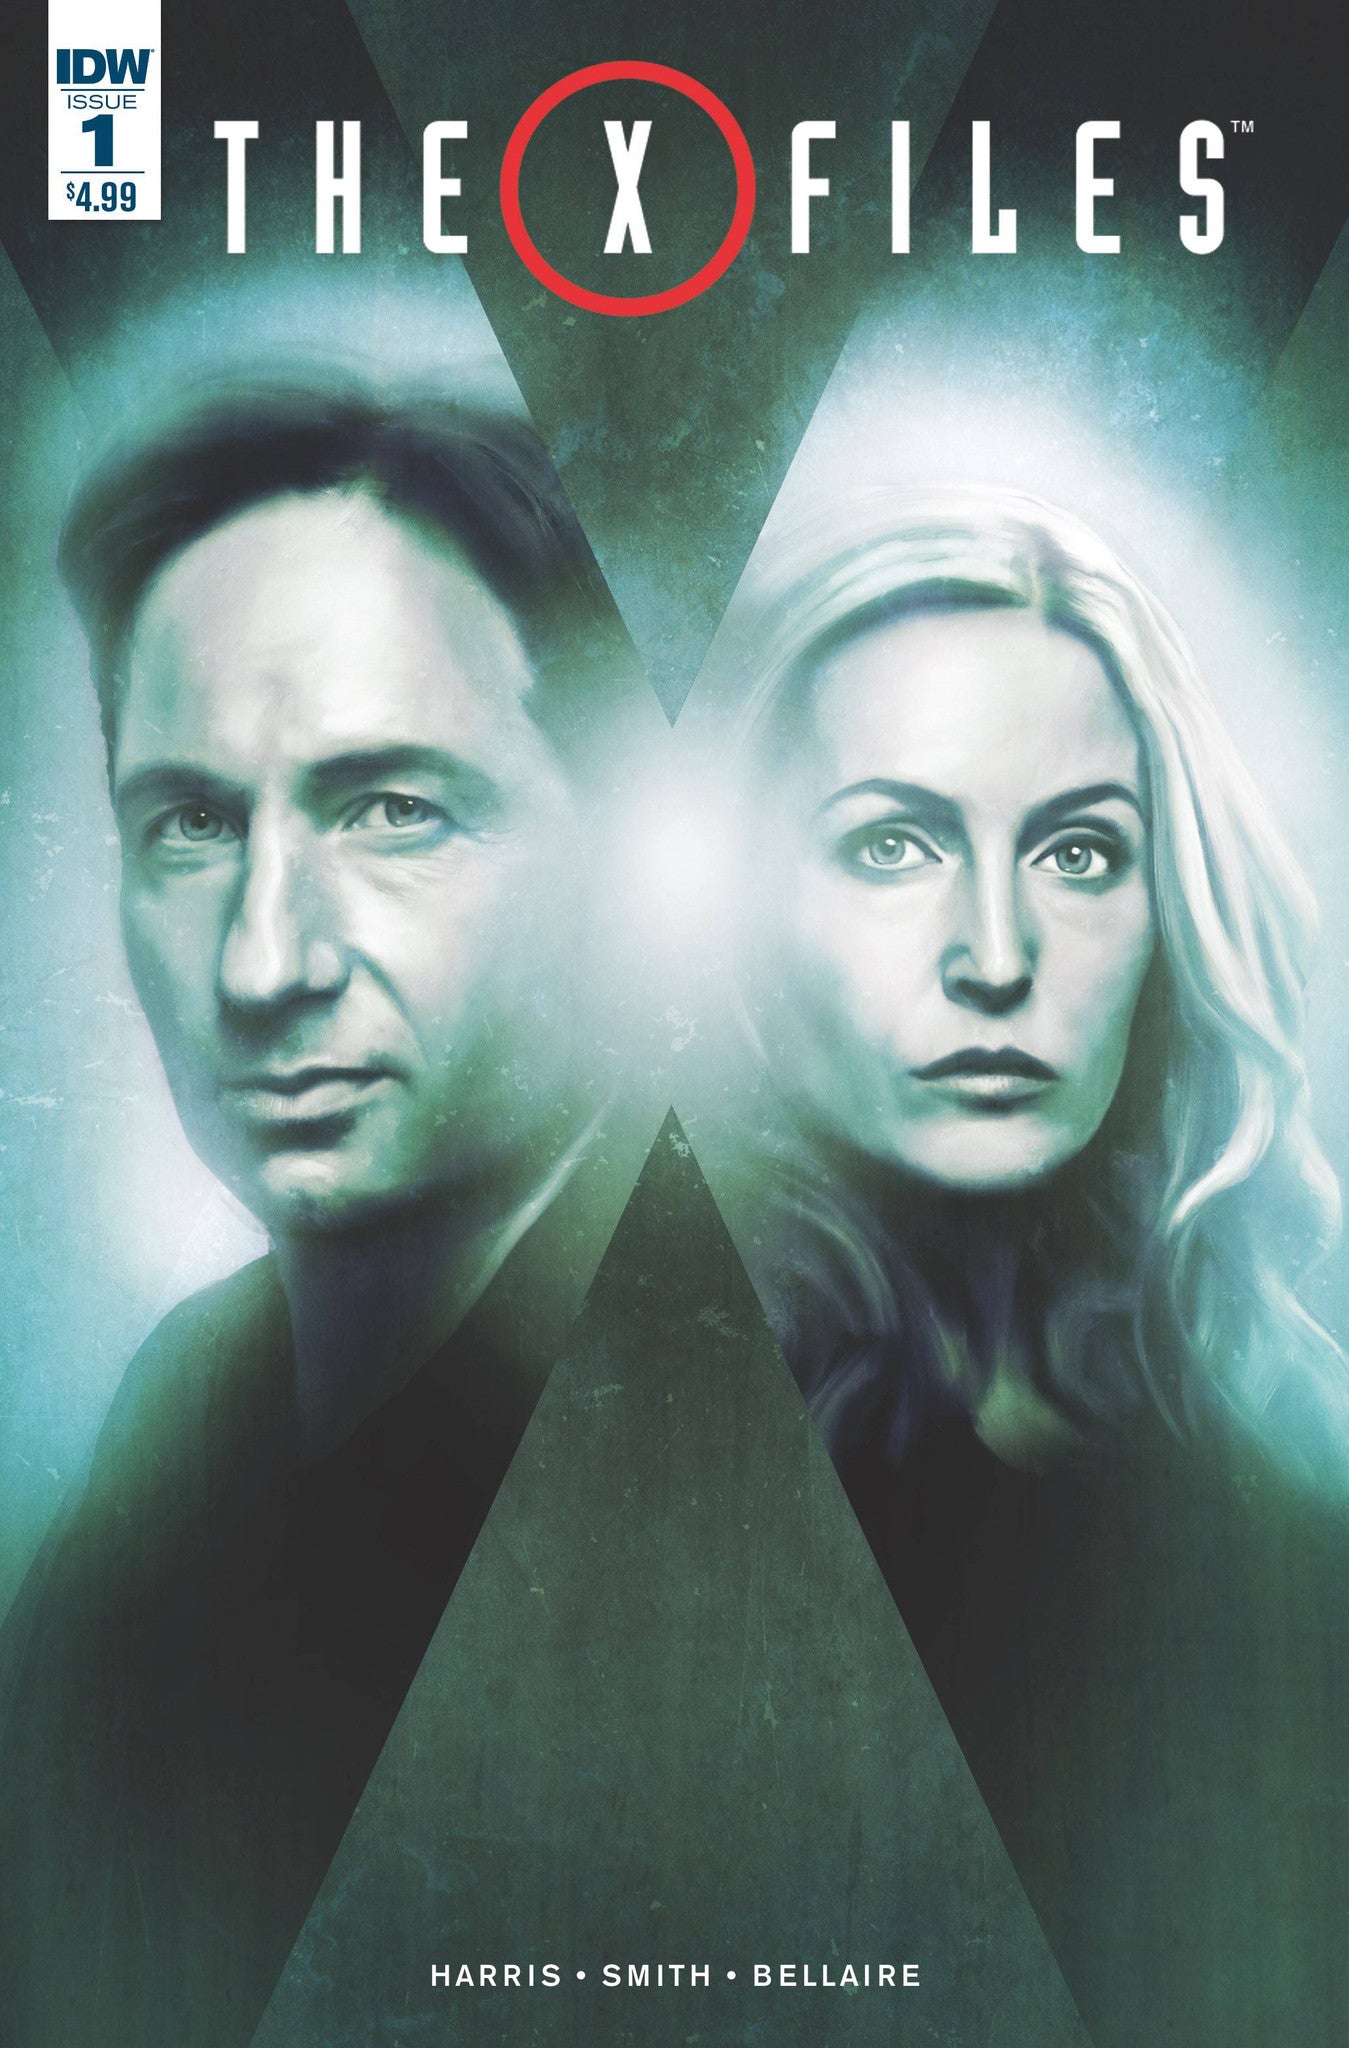 X-FILES (2016) #1 COVER